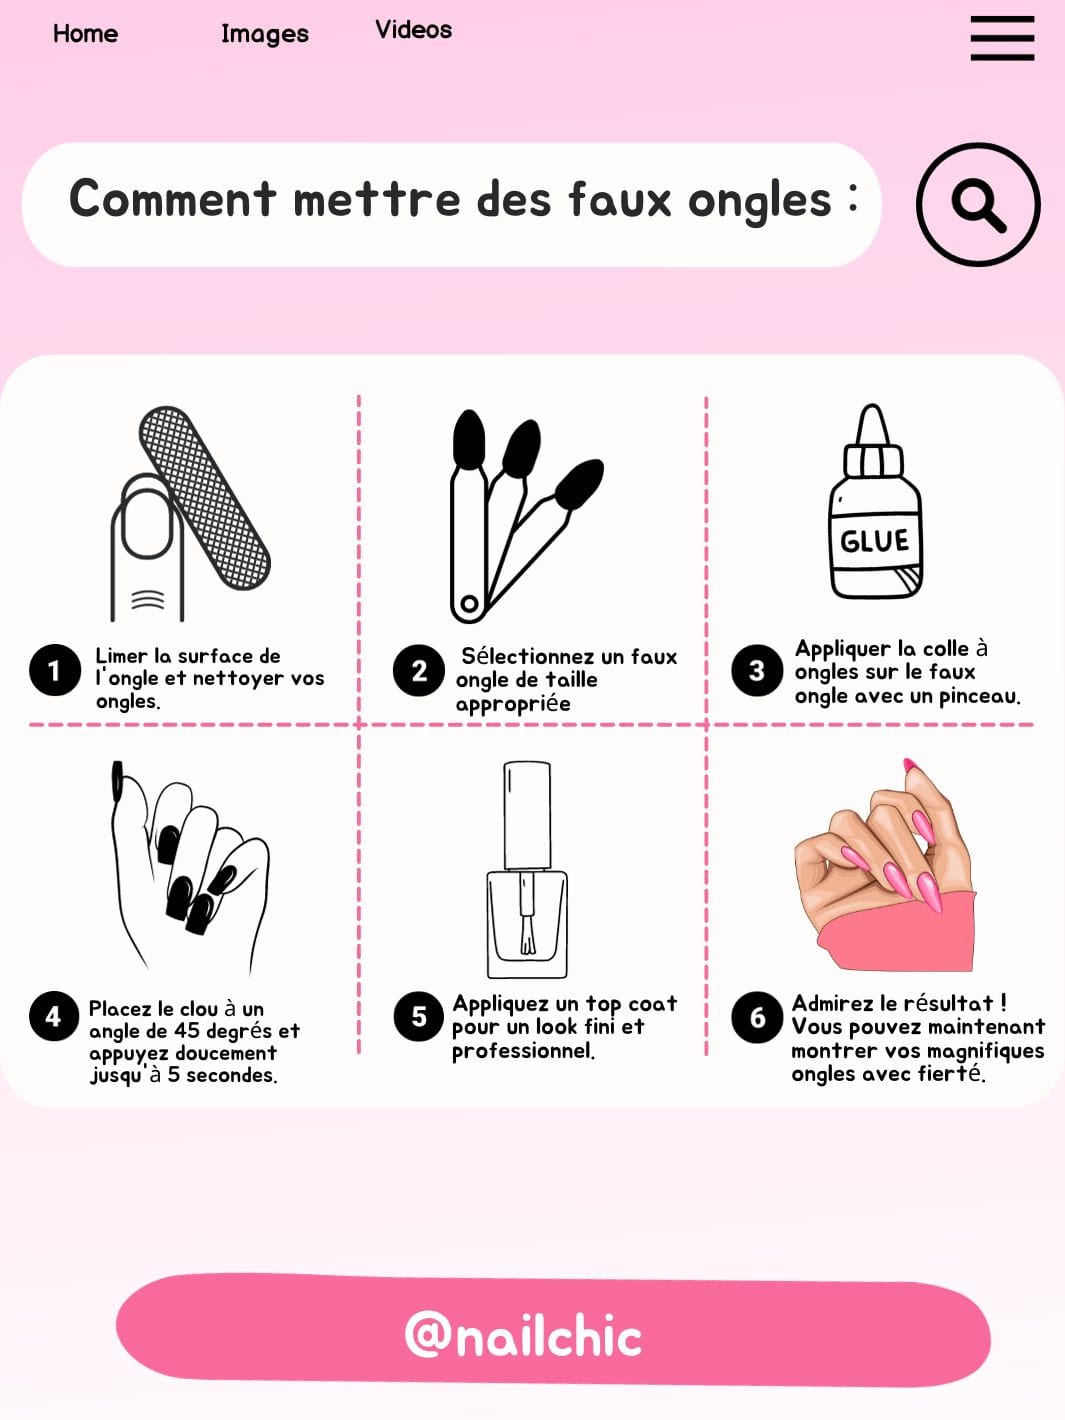 Faux ongle french Nail Chic